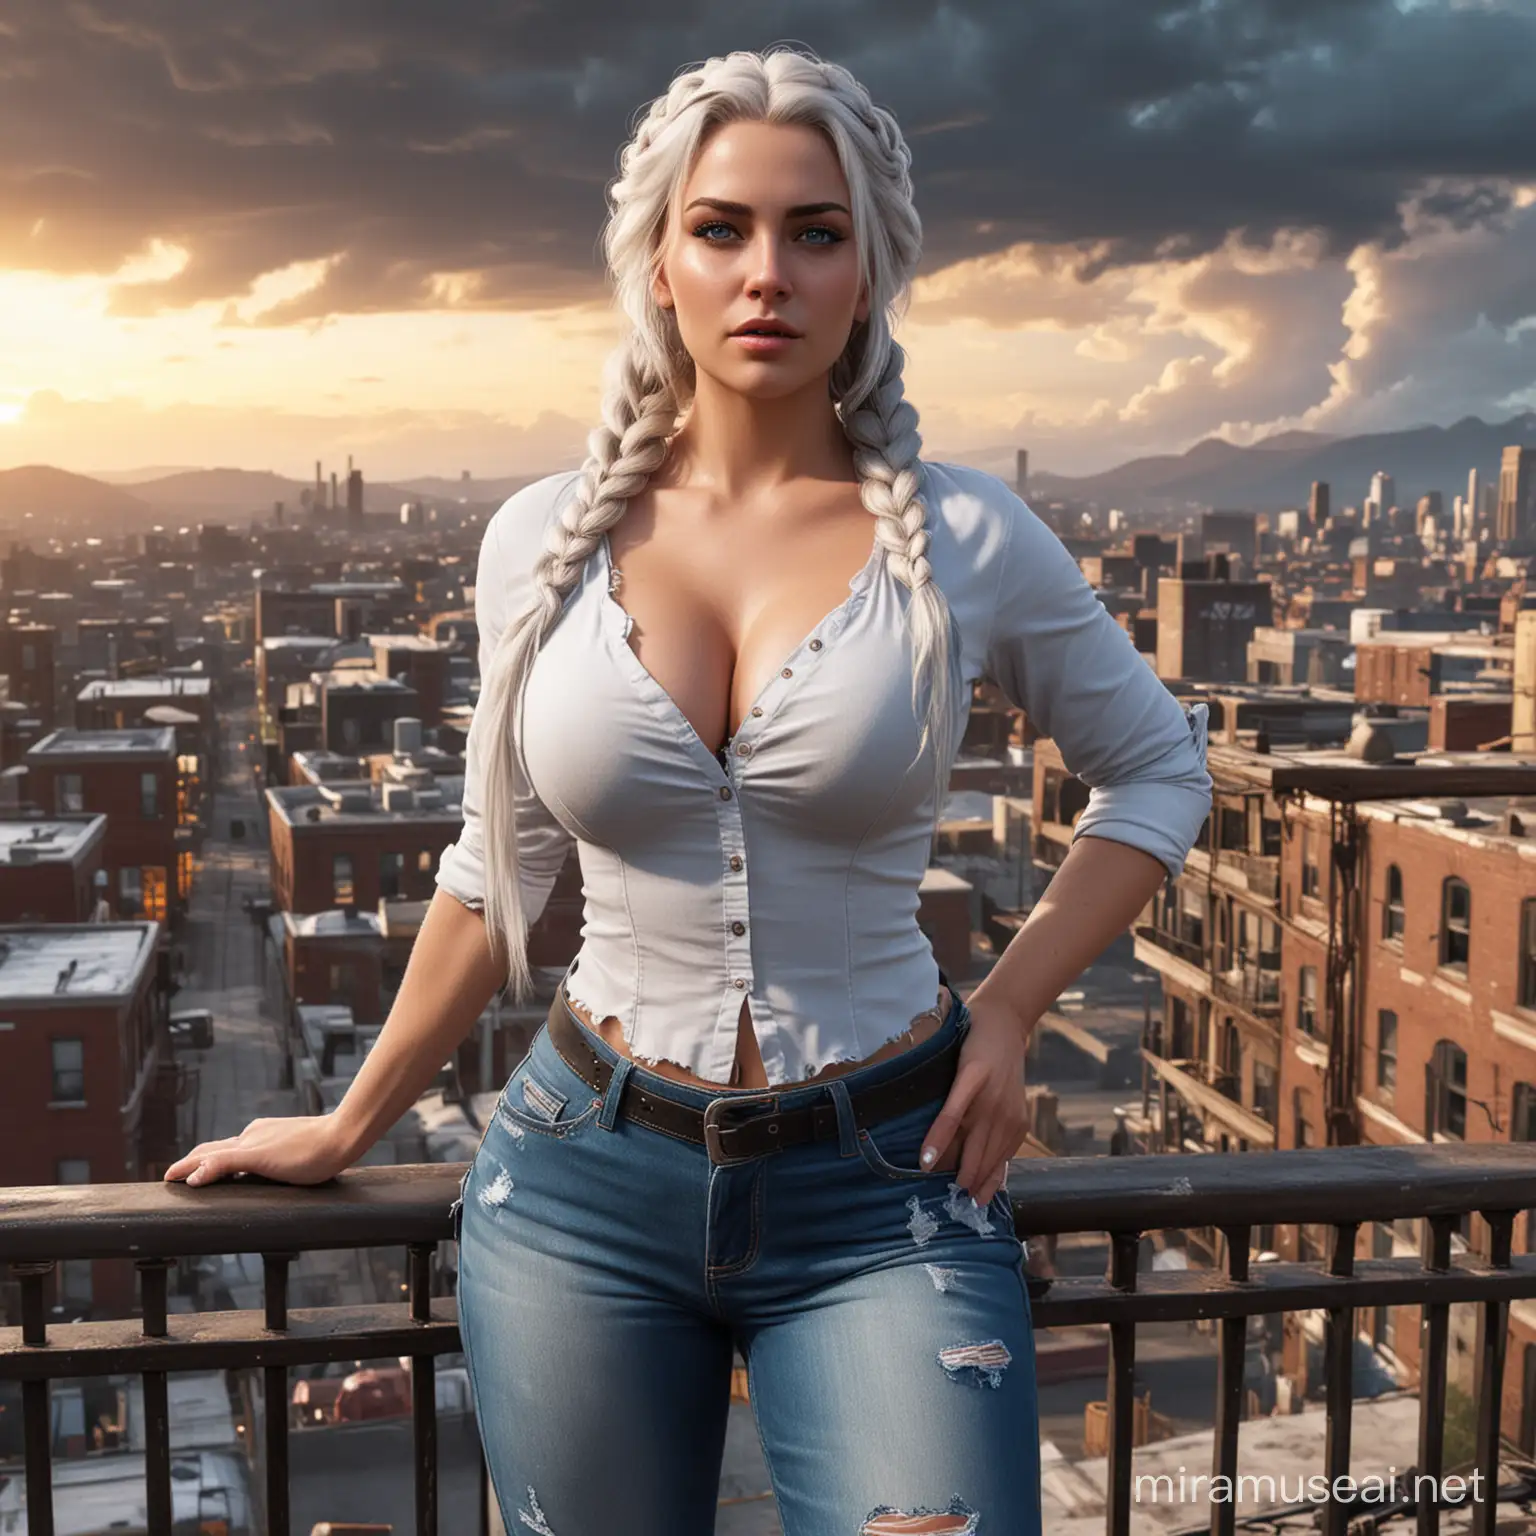 30 years old, woman, head to toe in frame, hourglass figure, wide hips, big butt, angry glare, big butt, eyeliner and mascara, bright blue eyes, long wavy hair, bright white hair, all hair in one very thick braid, braided hair, tight jeans with many rips and patches, ripped black shirt, tall black boots, black thick rimmed glasses, bright blue eyes, hands on hips, huge tits, huge tits, huge tits, cleavage, cleavage, sweary skin, standing on rooftop, fallout 4 cityscape in background, dark clouds, sunset, light at low angle, ocean in distance